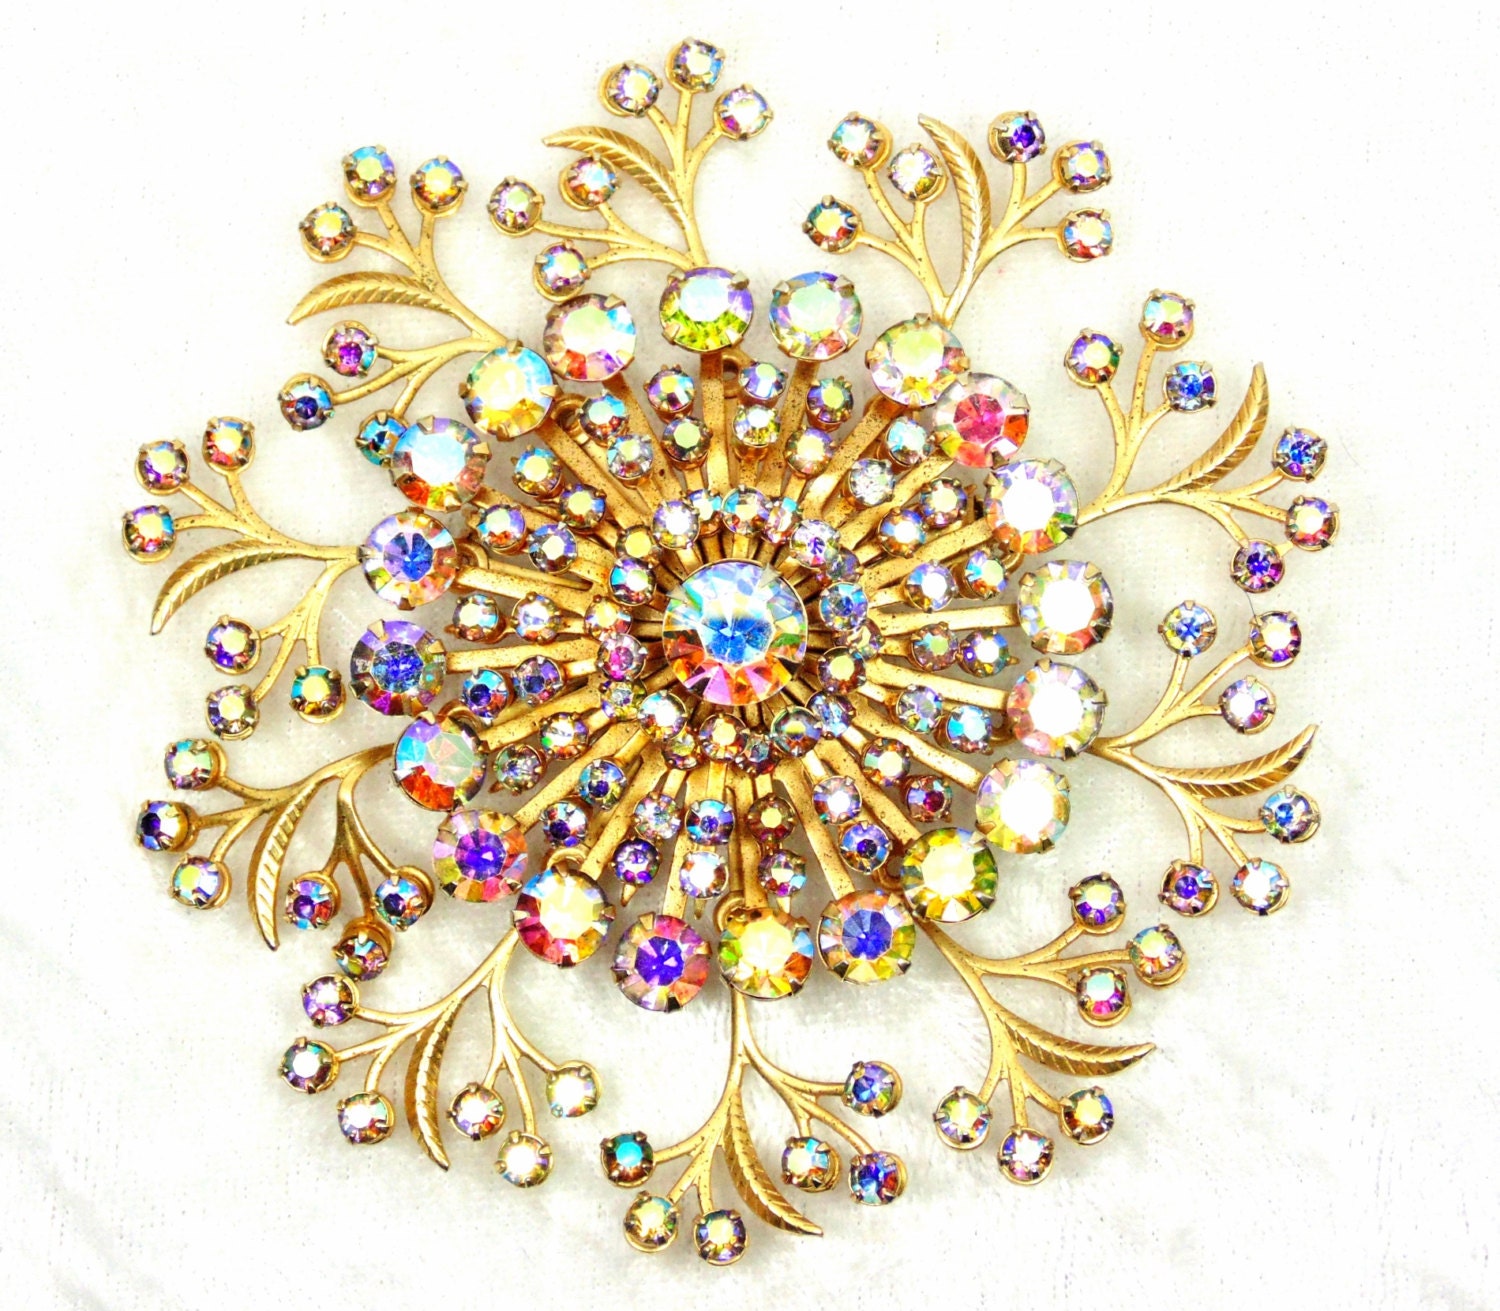 Huge AB Brooch 1950s Atomic Floral Design with Glass Crystal